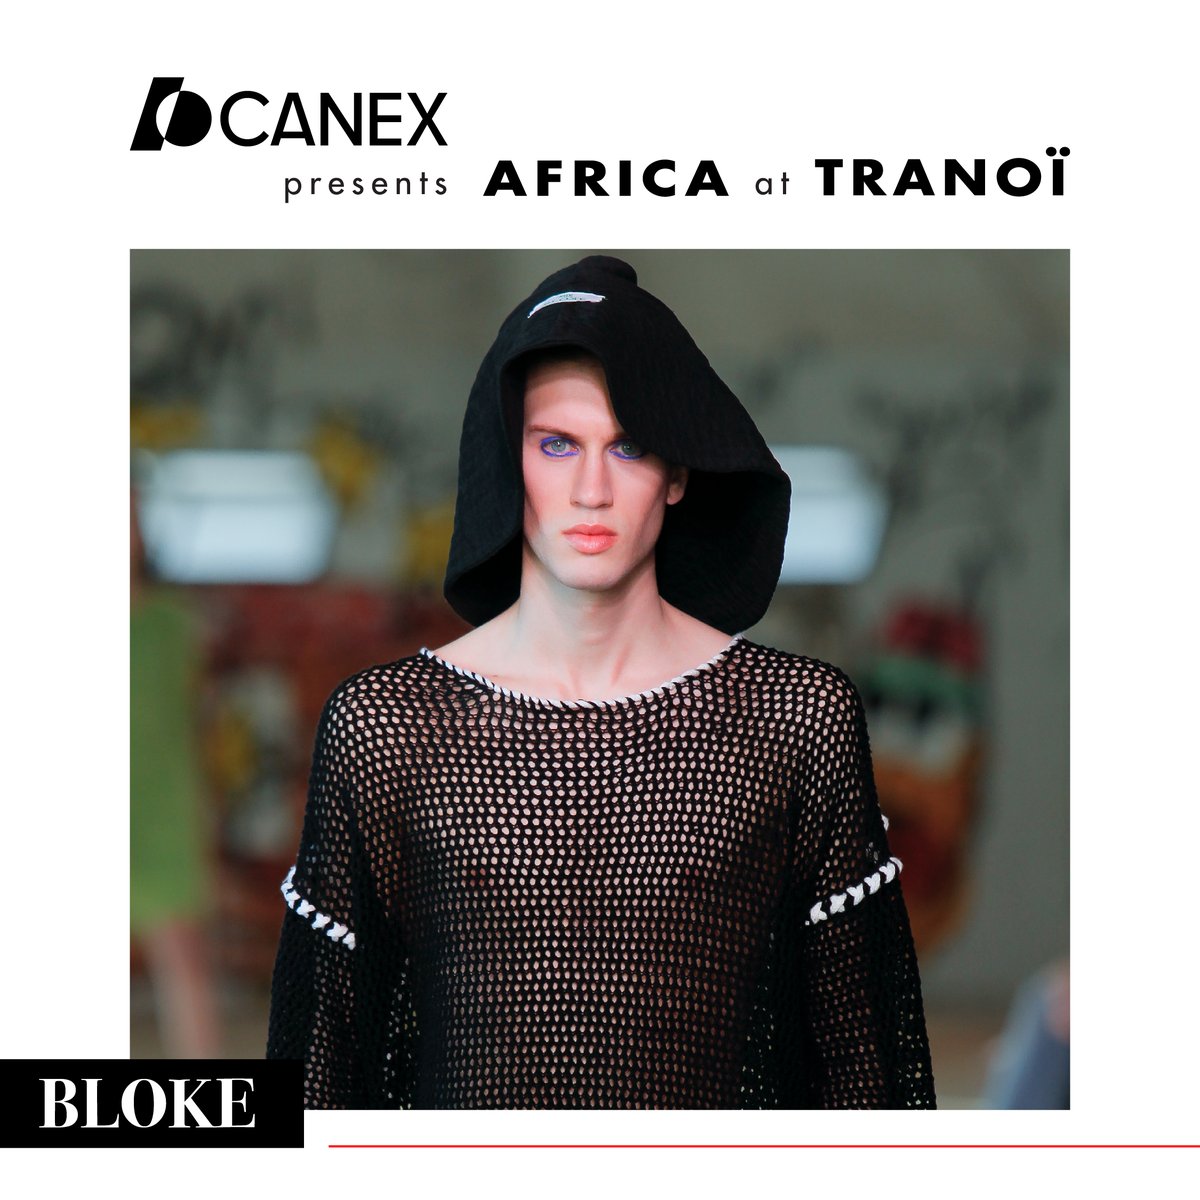 CanexAfrica tweet picture